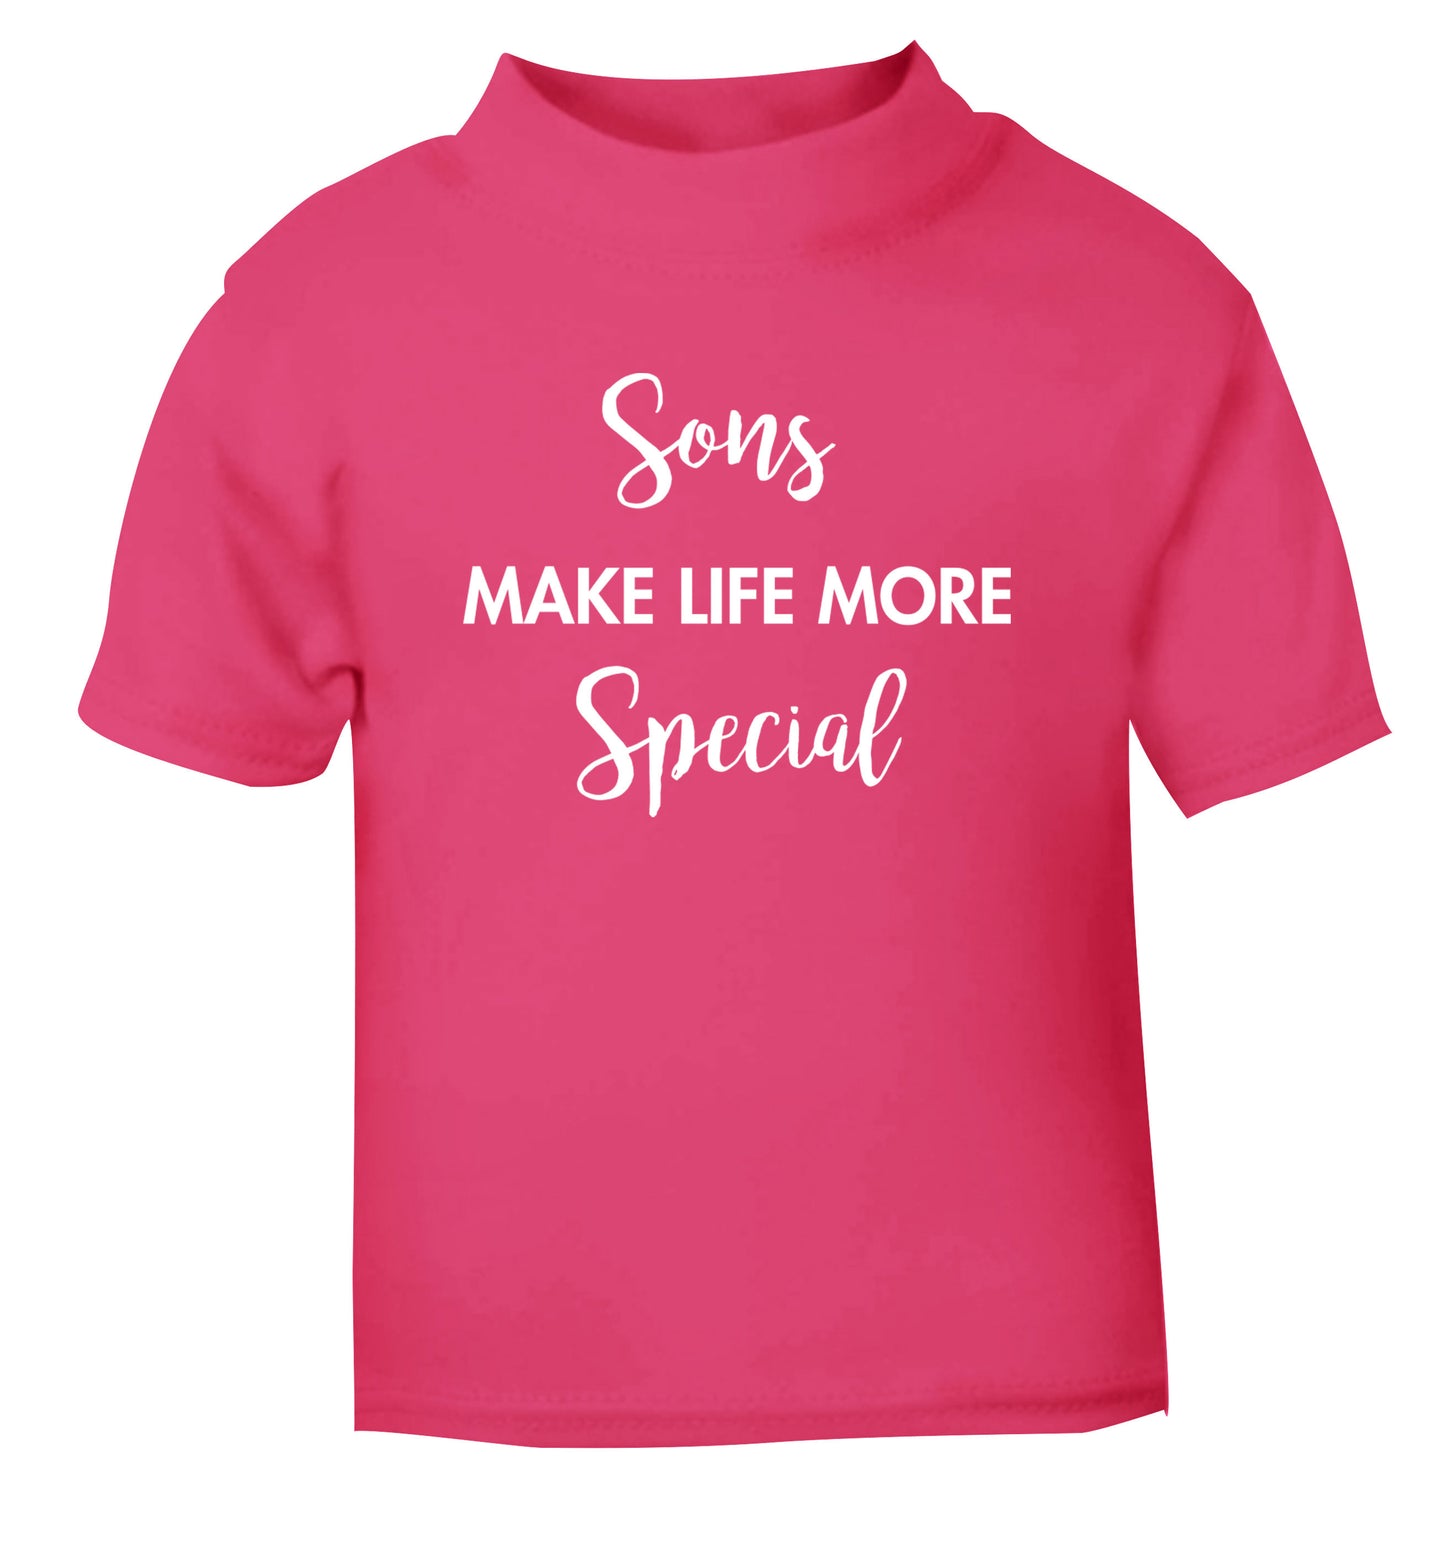 Sons make life more special pink Baby Toddler Tshirt 2 Years